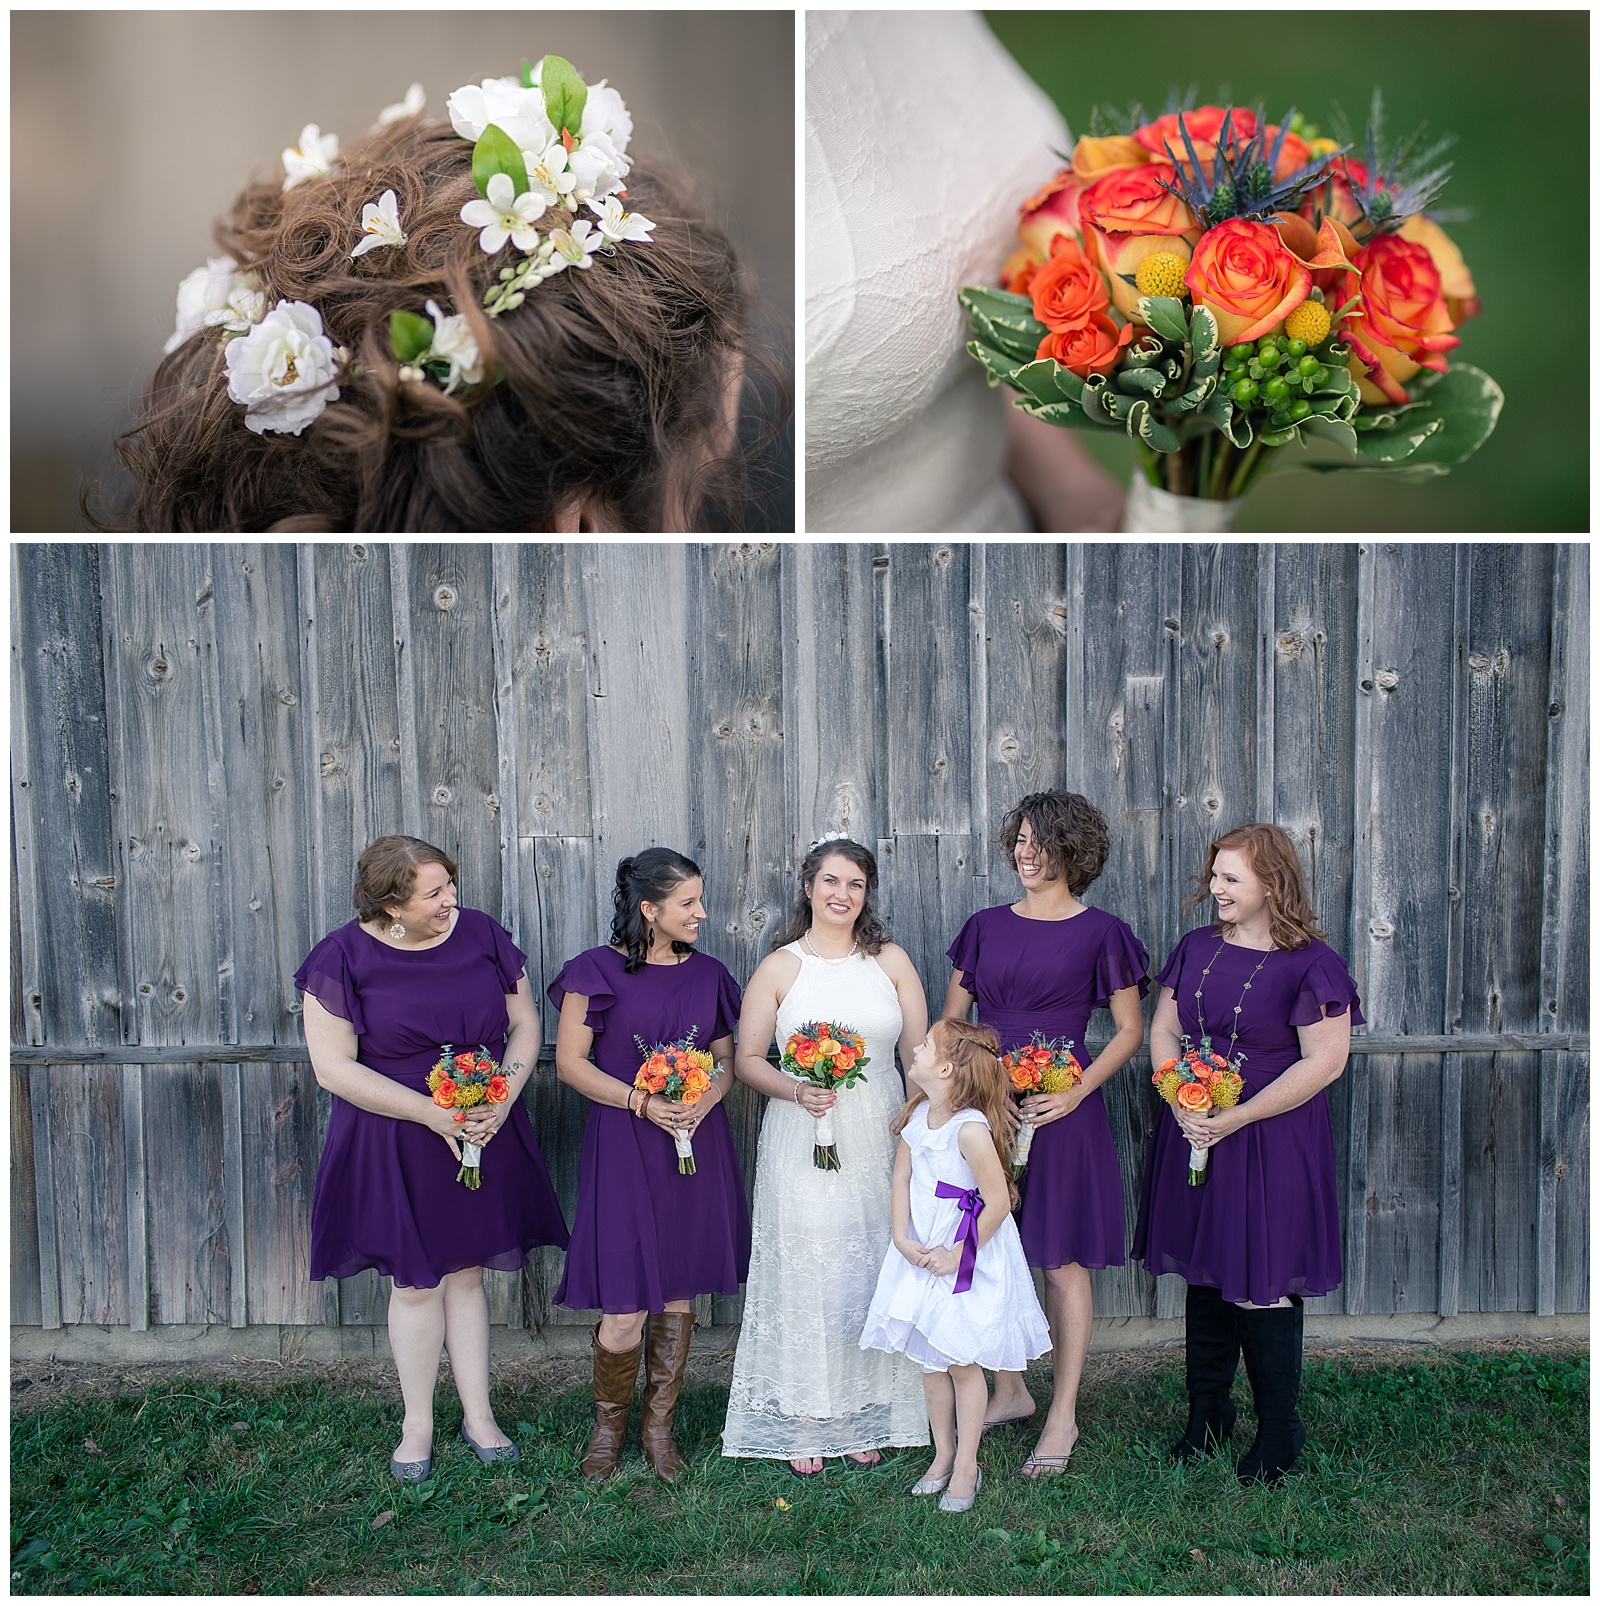 Wedding photography at Backwoods Venue 222 in Gower, Missouri.